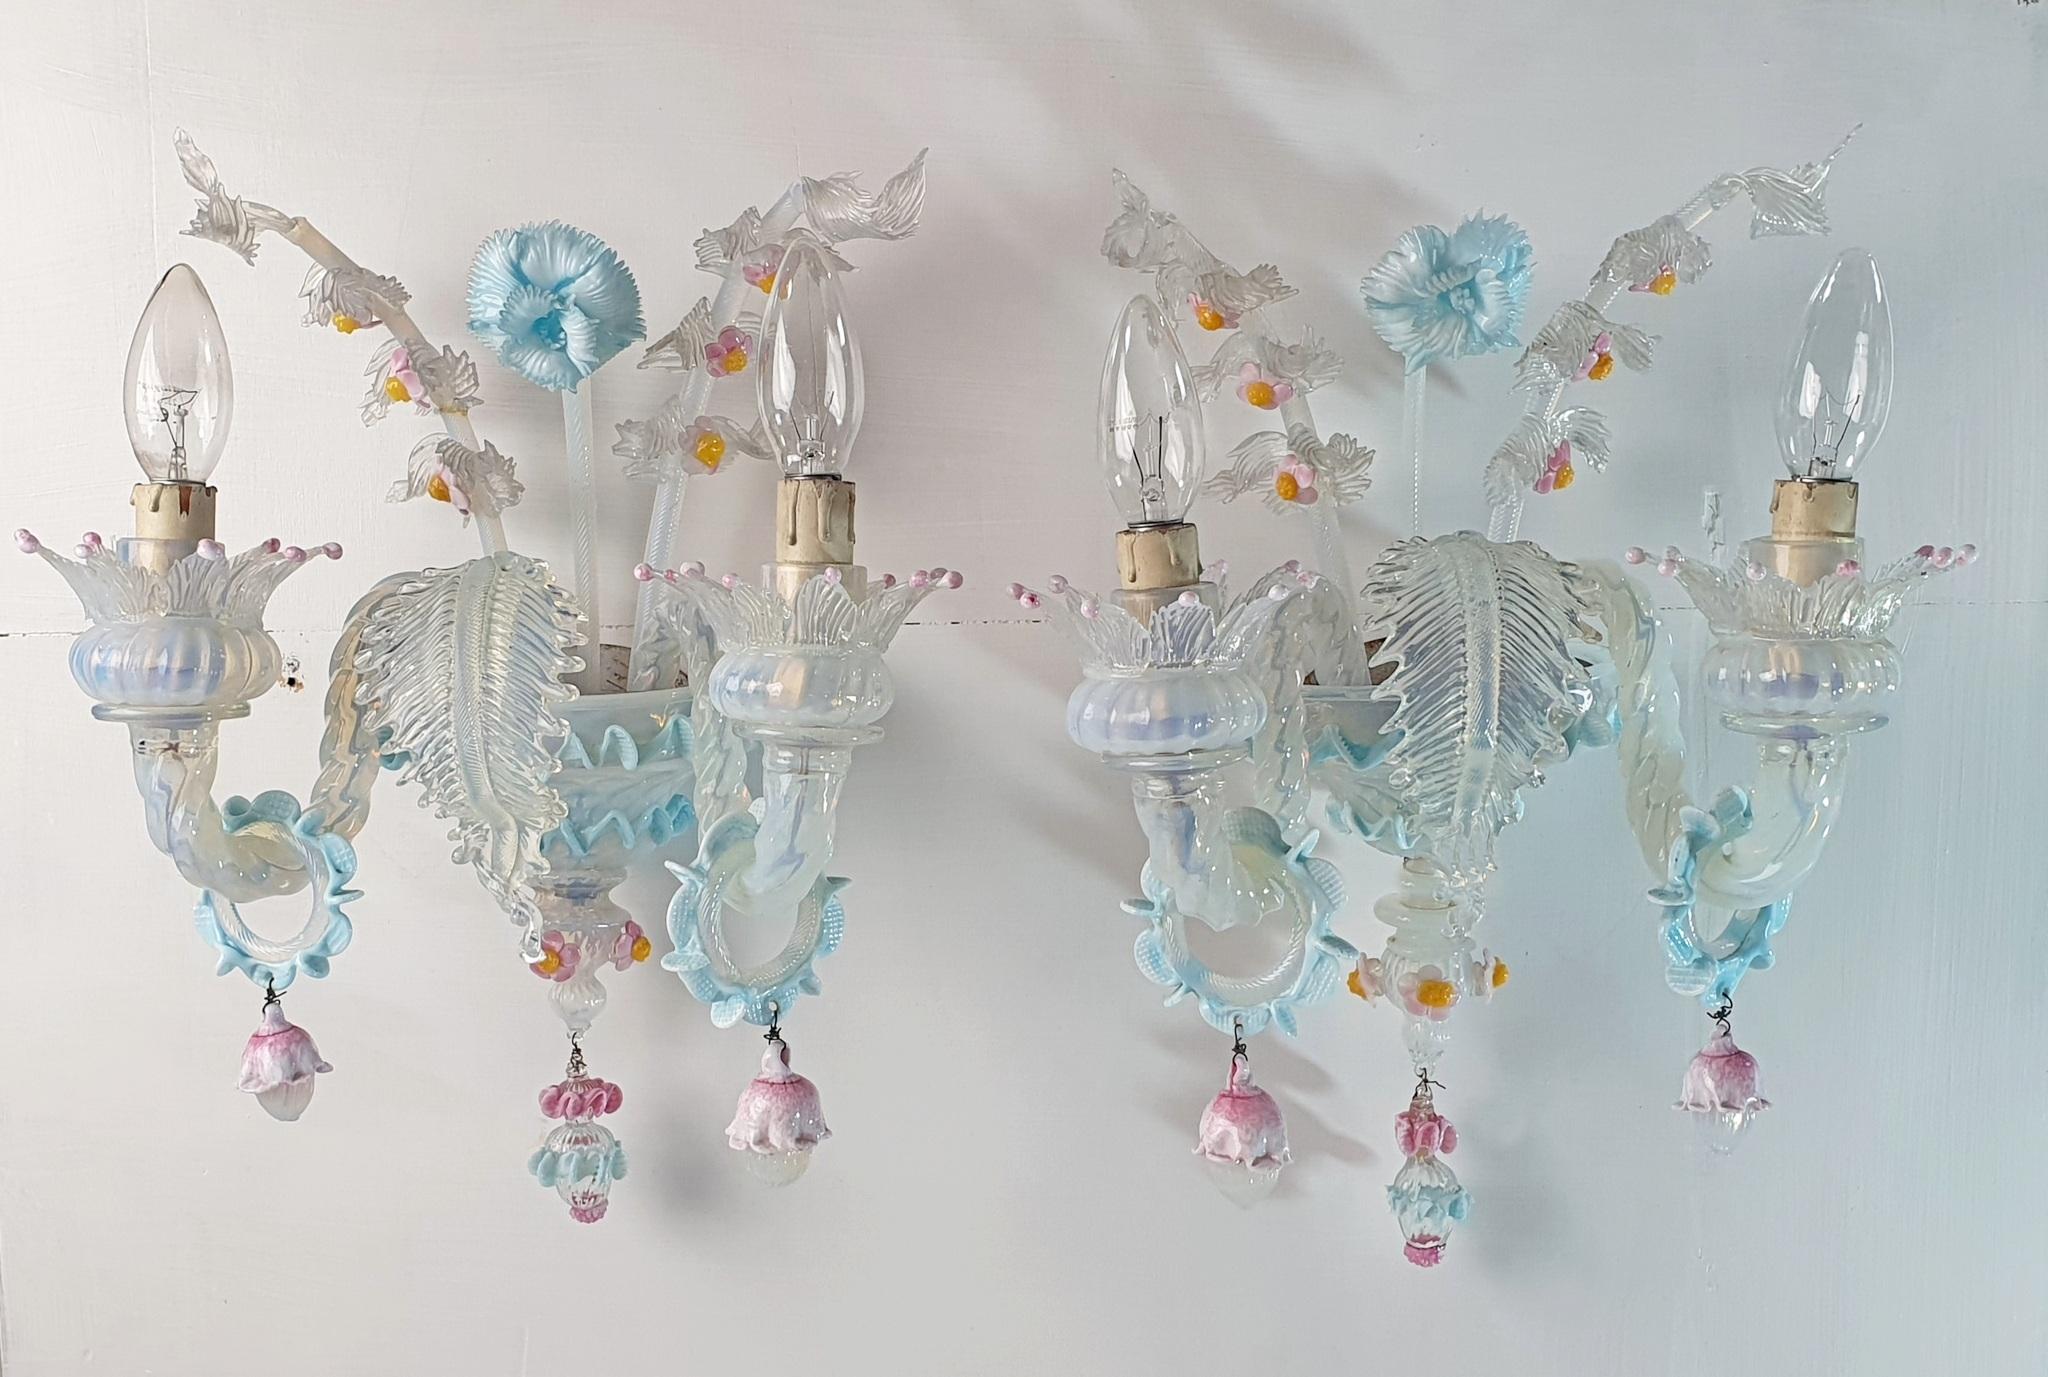 A nice pair of classic Murano sconces in Venetian style in milky white glass and soft pastels in pink, blue and yellow colored glass giving the light a nice shimmer. The sconces are handmade in Murano and are complete with flowers in the middle of